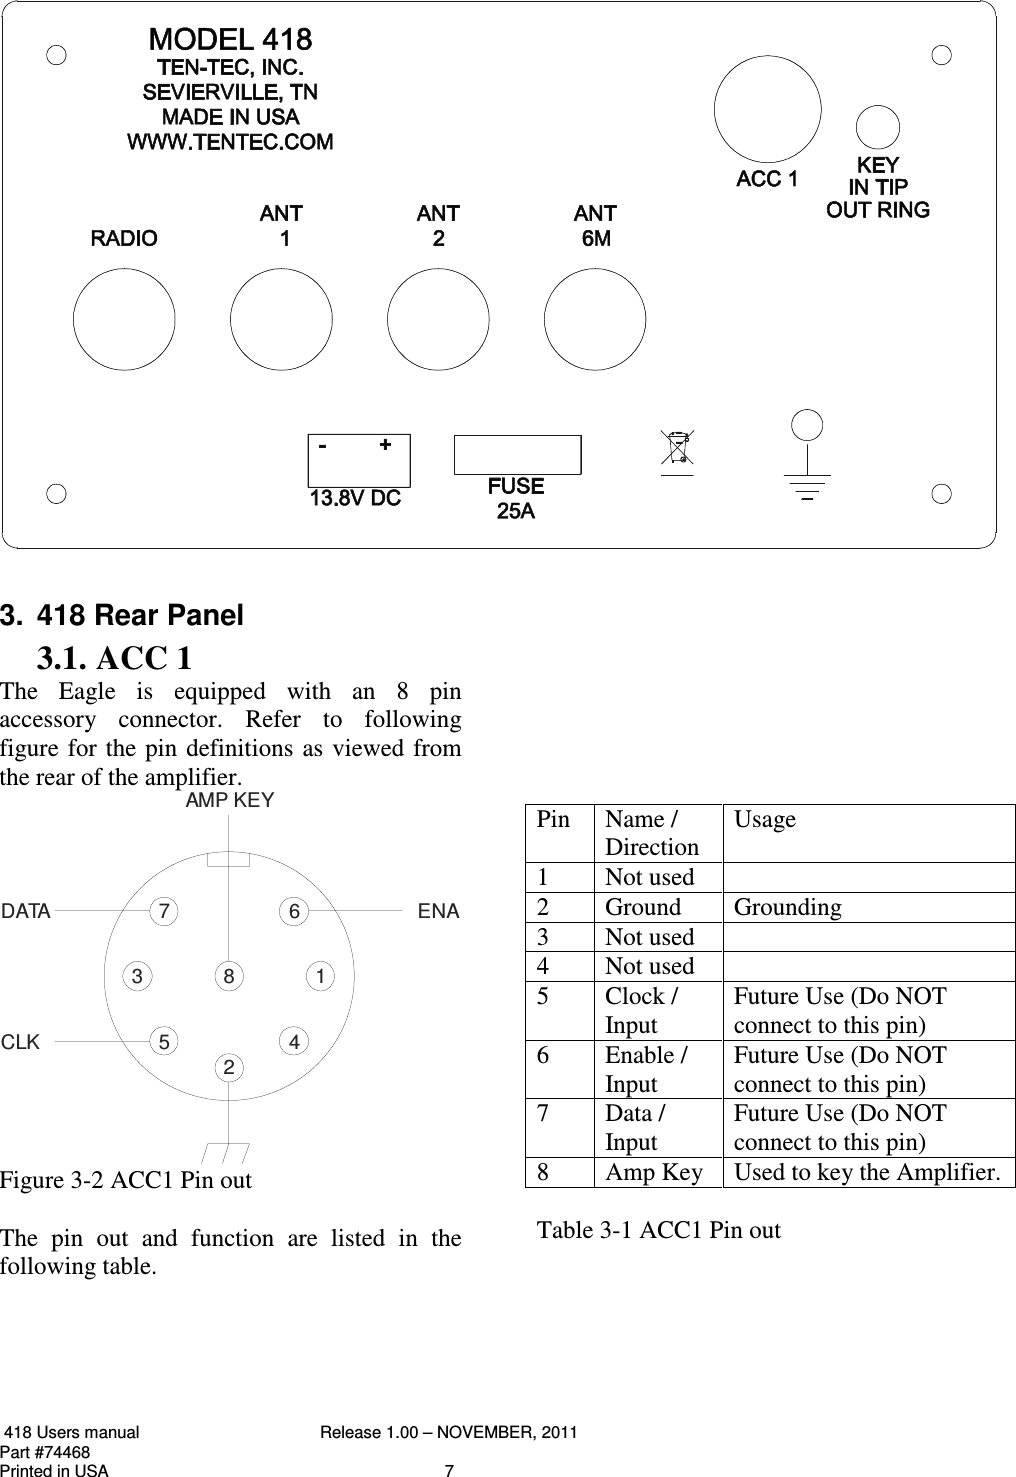  418 Users manual  Release 1.00 – NOVEMBER, 2011   Part #74468   Printed in USA  7                   3.  418 Rear Panel 3.1. ACC 1 The  Eagle  is  equipped  with  an  8  pin accessory  connector.  Refer  to  following figure for the pin  definitions as viewed from the rear of the amplifier. 61425378ENADATACLKAMP KEY Figure 3-2 ACC1 Pin out   The  pin  out  and  function  are  listed  in  the following table.                               Pin  Name / Direction Usage 1  Not used   2  Ground  Grounding 3  Not used   4  Not used   5  Clock / Input Future Use (Do NOT connect to this pin) 6  Enable / Input Future Use (Do NOT connect to this pin) 7  Data / Input Future Use (Do NOT connect to this pin) 8  Amp Key   Used to key the Amplifier.   Table 3-1 ACC1 Pin out      